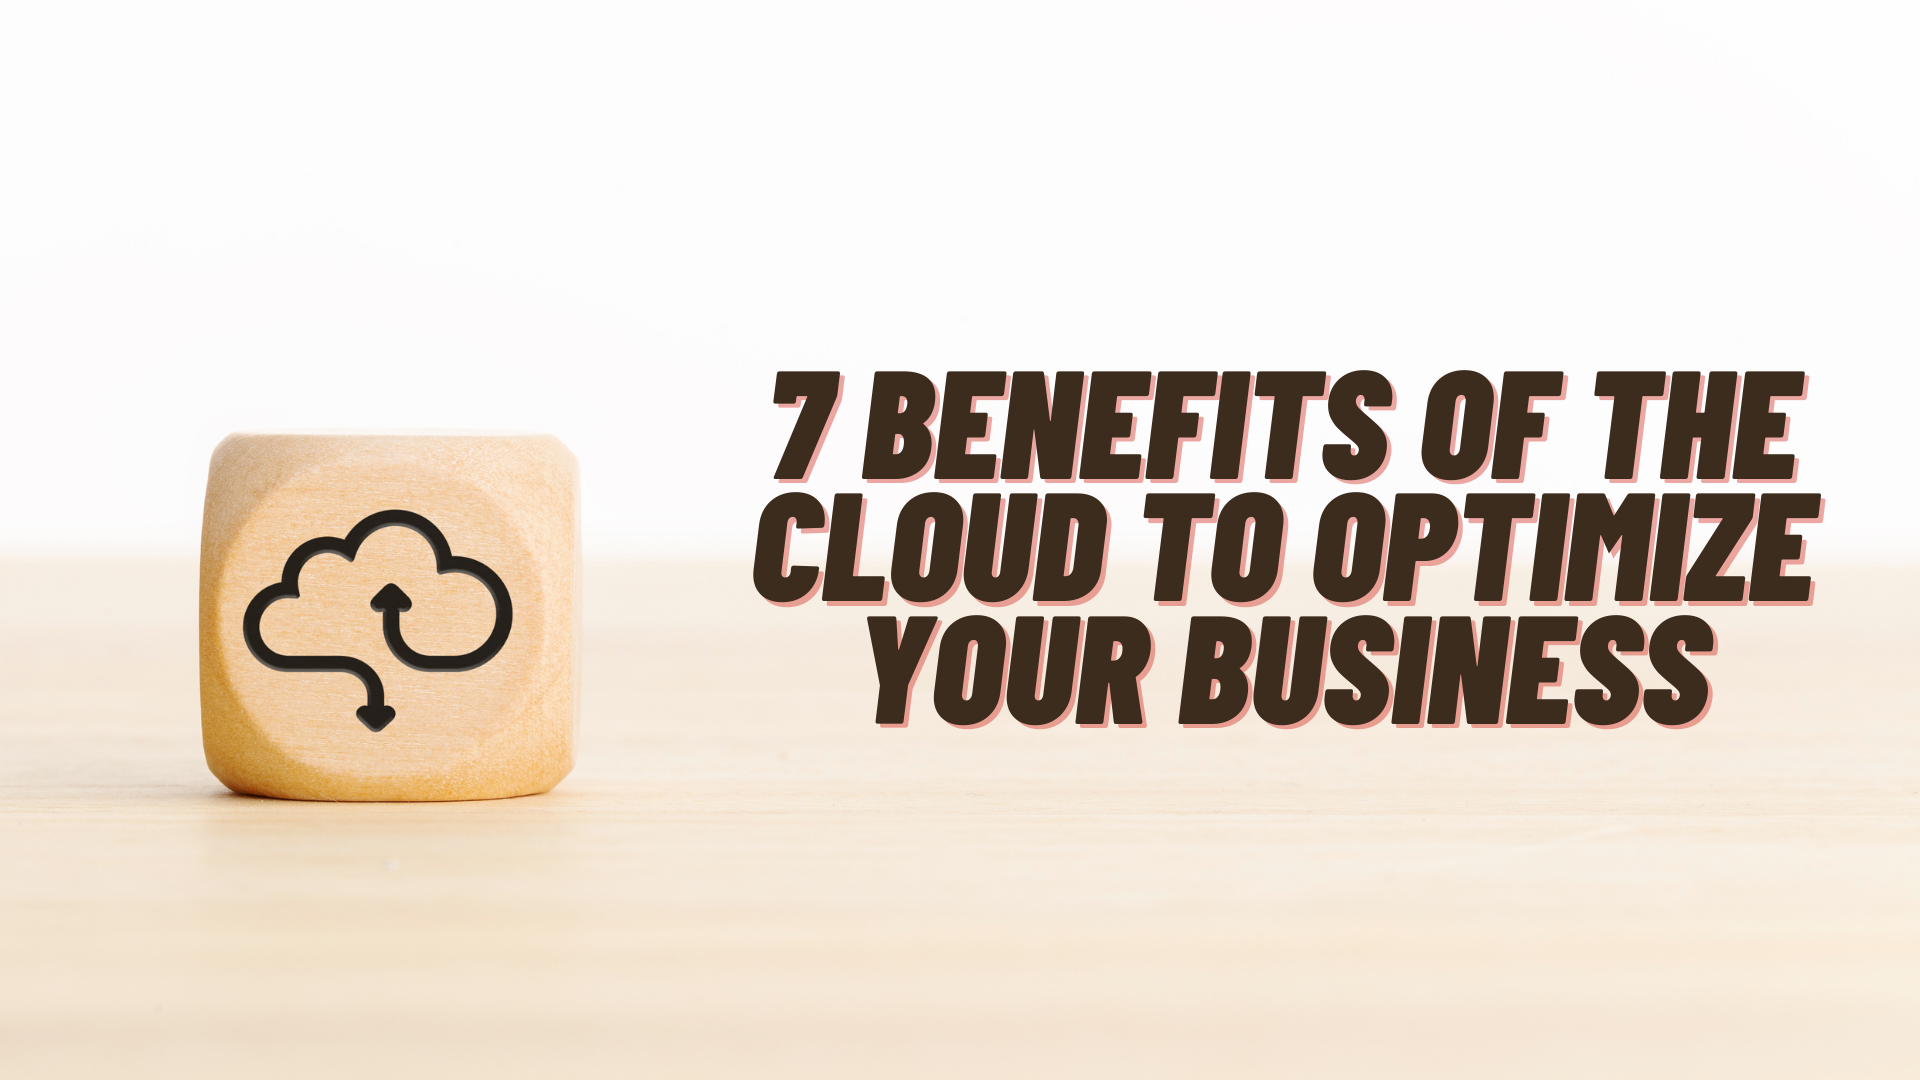 Image of 7 Benefits of the Cloud to Optimize Your Business